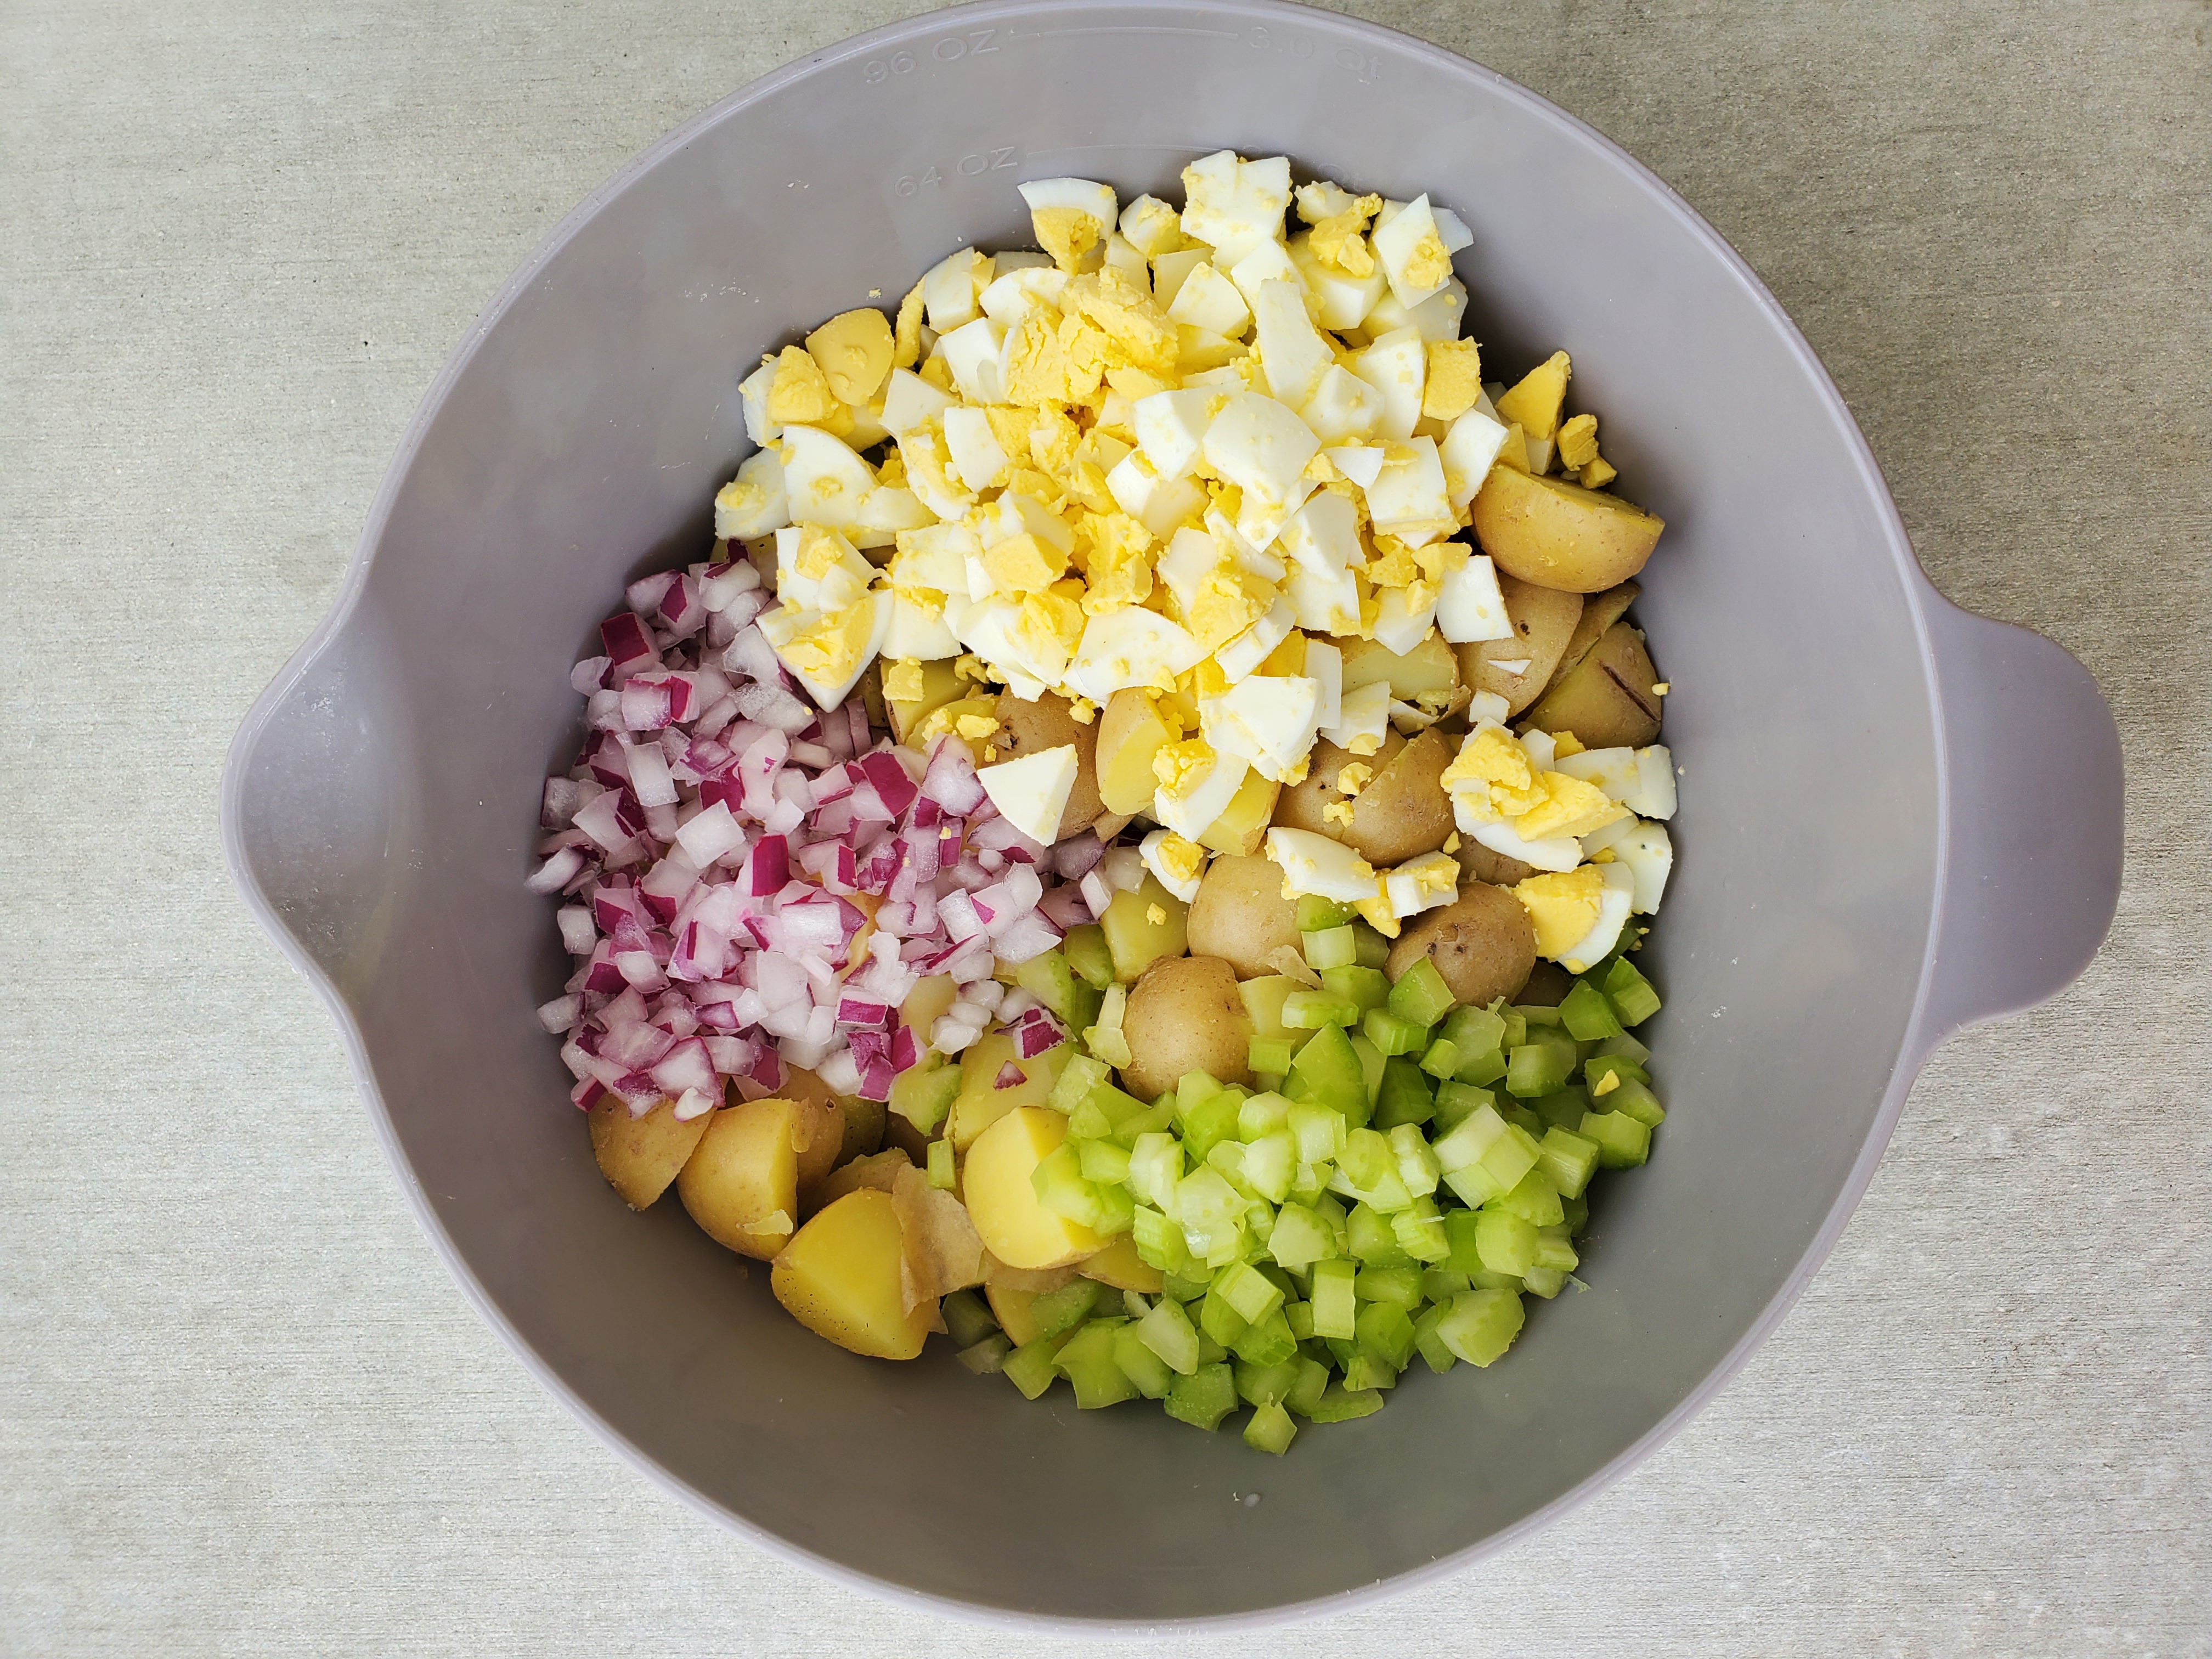 one bowl with egg potato salad ingredients - hard-boiled egg, potatoes, celery, onion